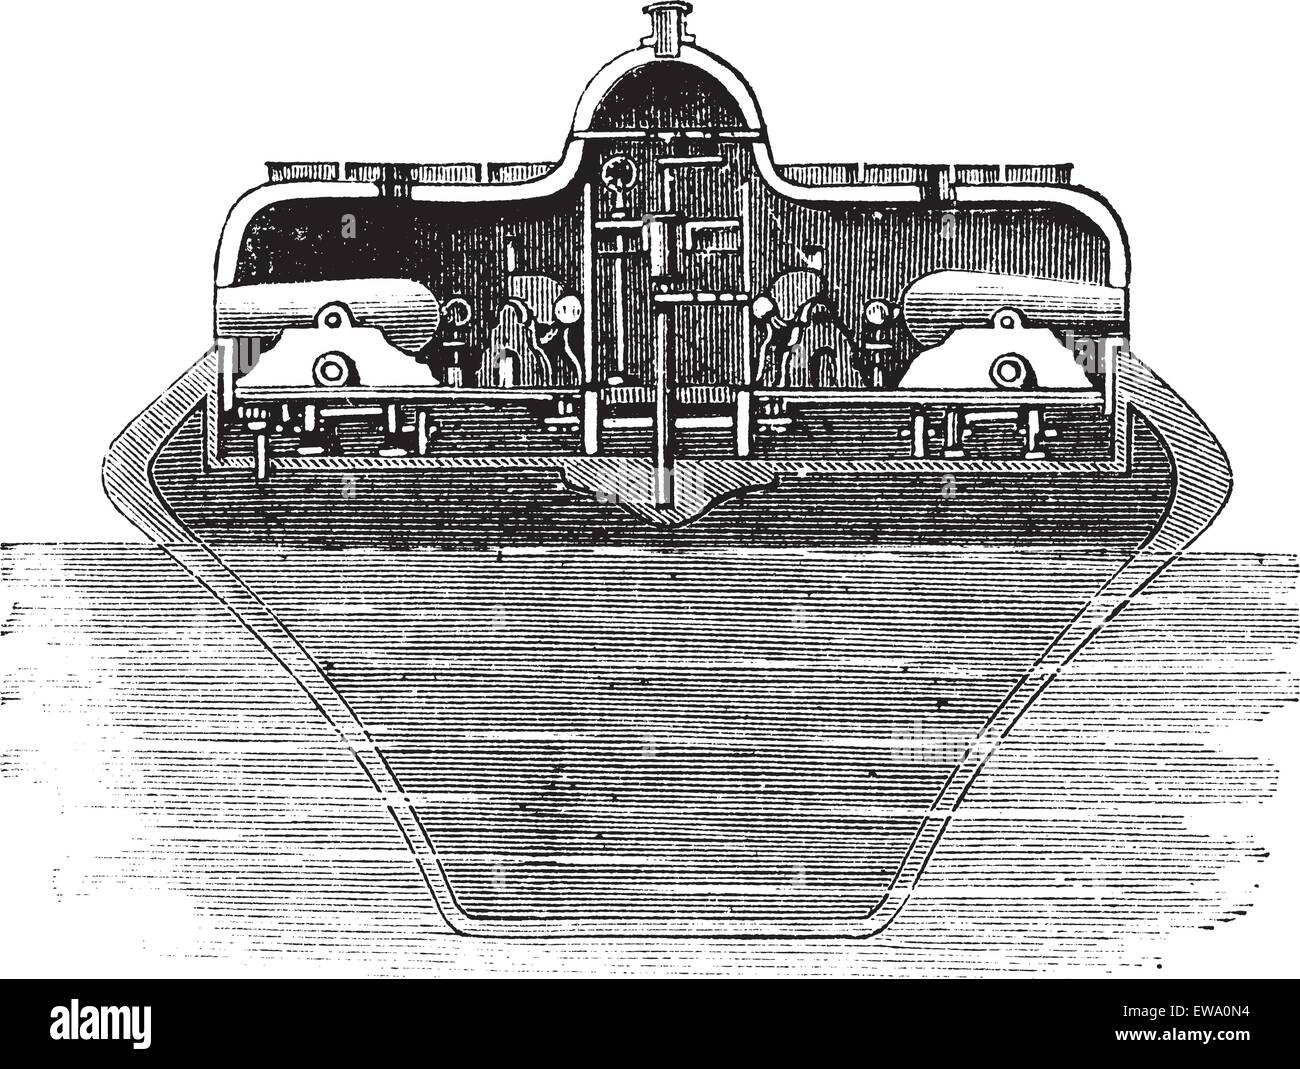 Uss monitor turret Stock Vector Images - Alamy